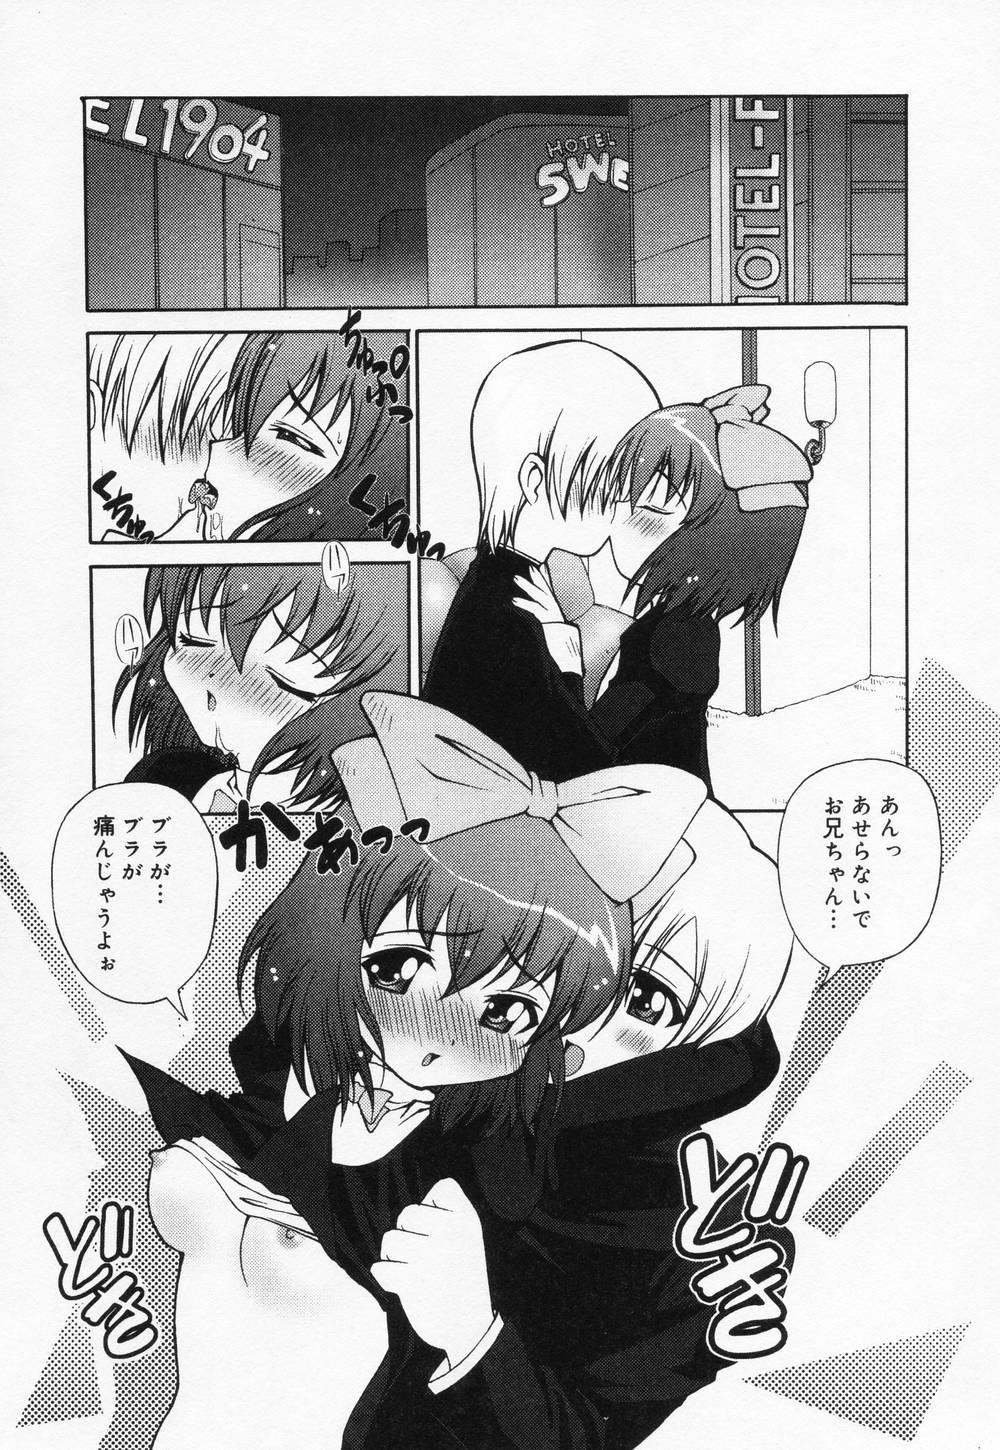 Blackmail Loli Anal 3some - Page 7